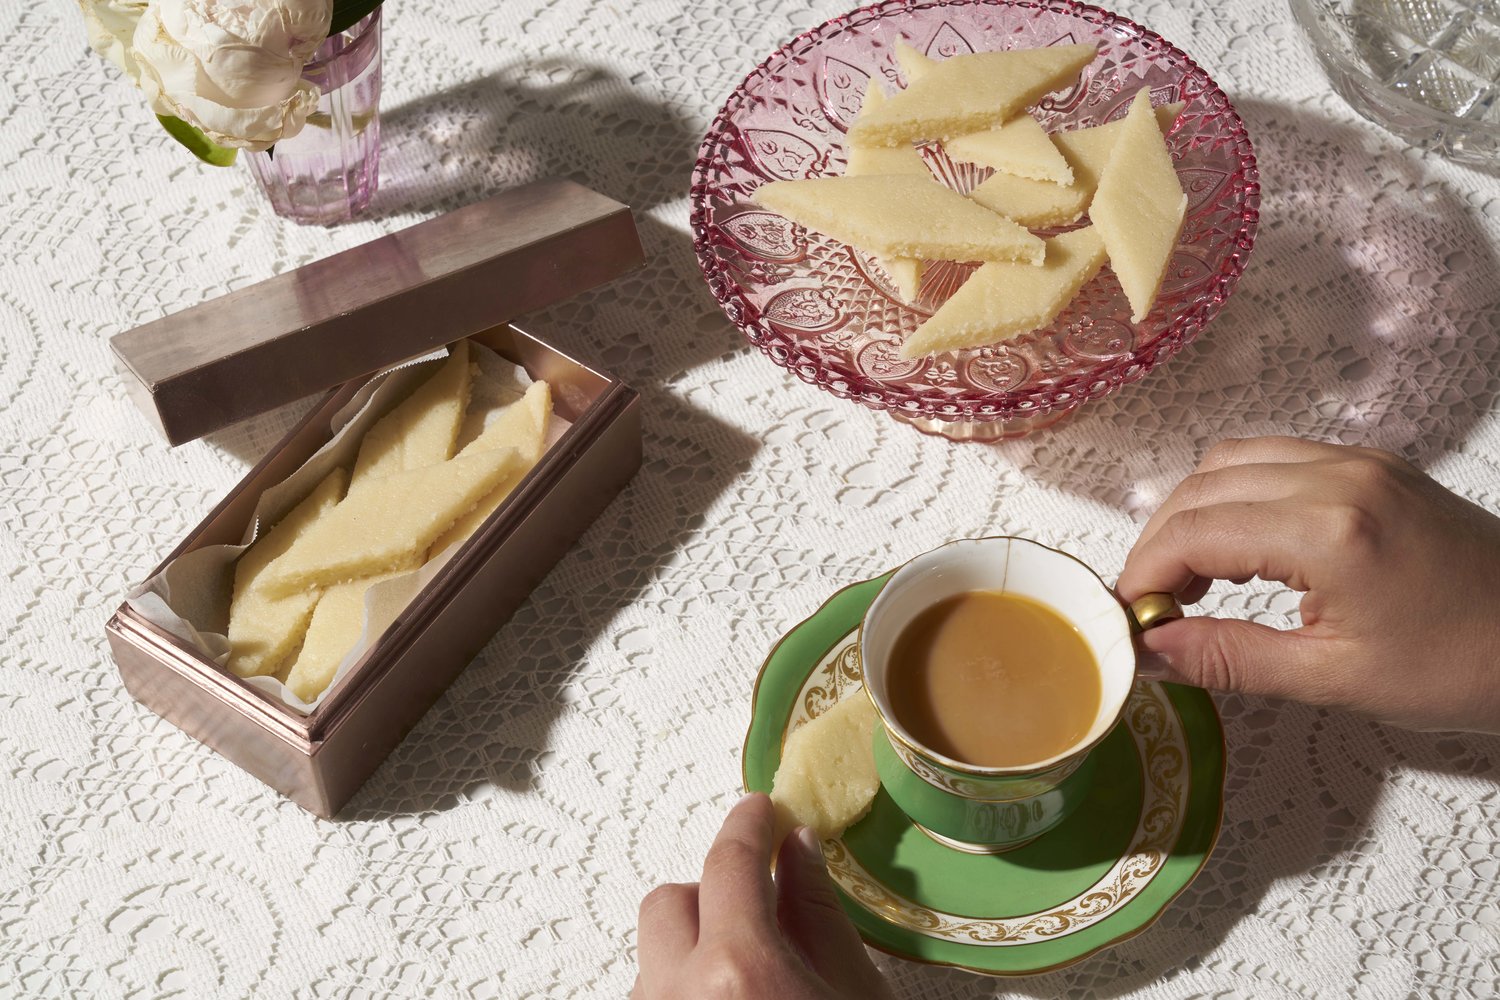 Slices of marzipan on a pink glass plate alongside small cup of tea